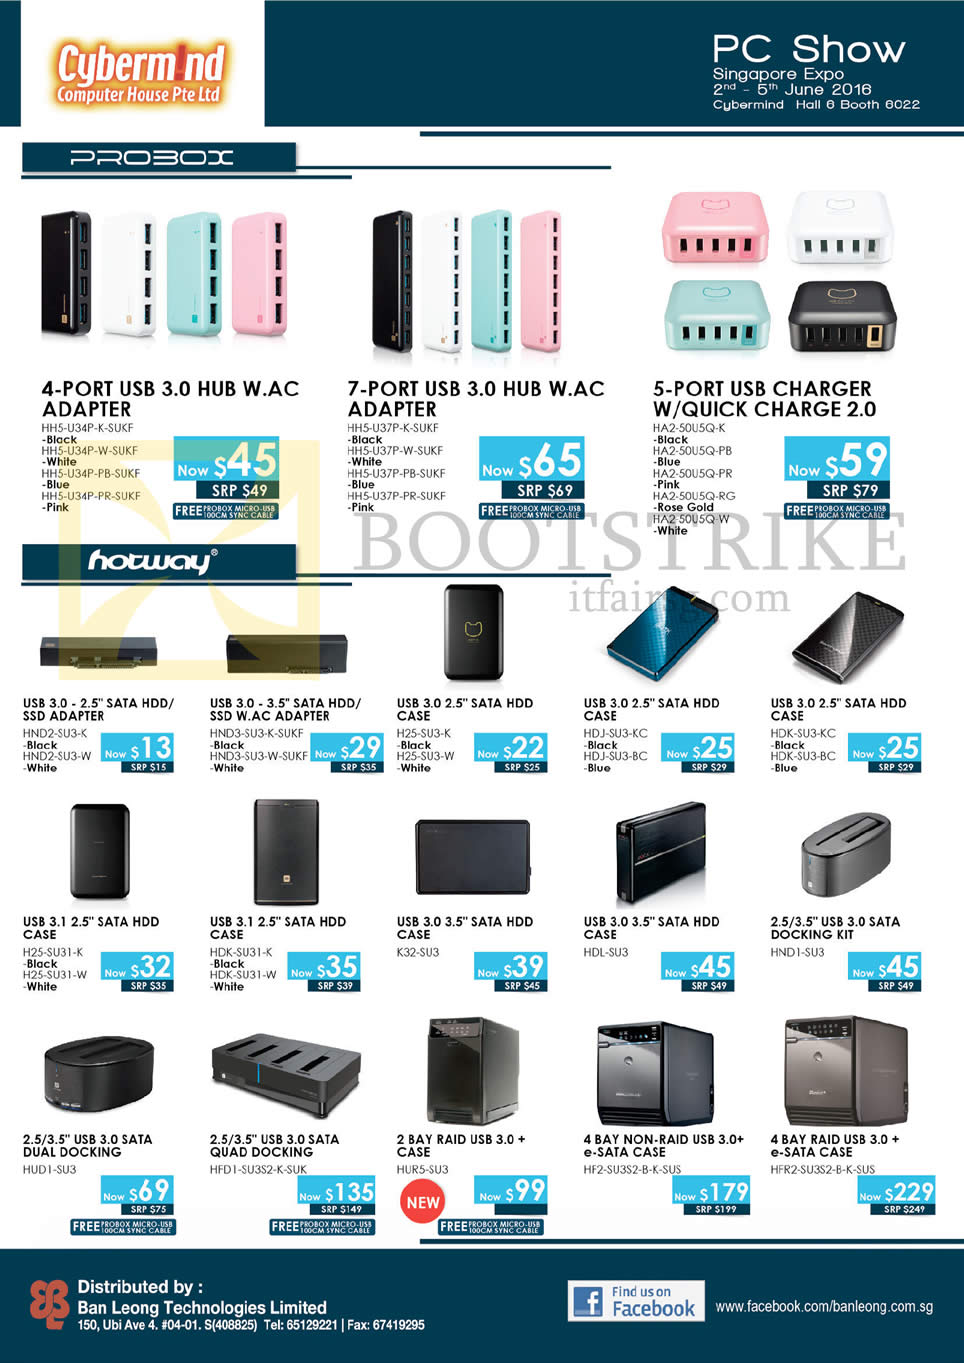 PC SHOW 2016 price list image brochure of Cybermind Probox Adapters, HDD Case, USB 3.0 Hub W. AC Adapter, Quick Charge 2.0, SSD Adapter, SATA SSD Case, Docking Kit, E-SATA Case